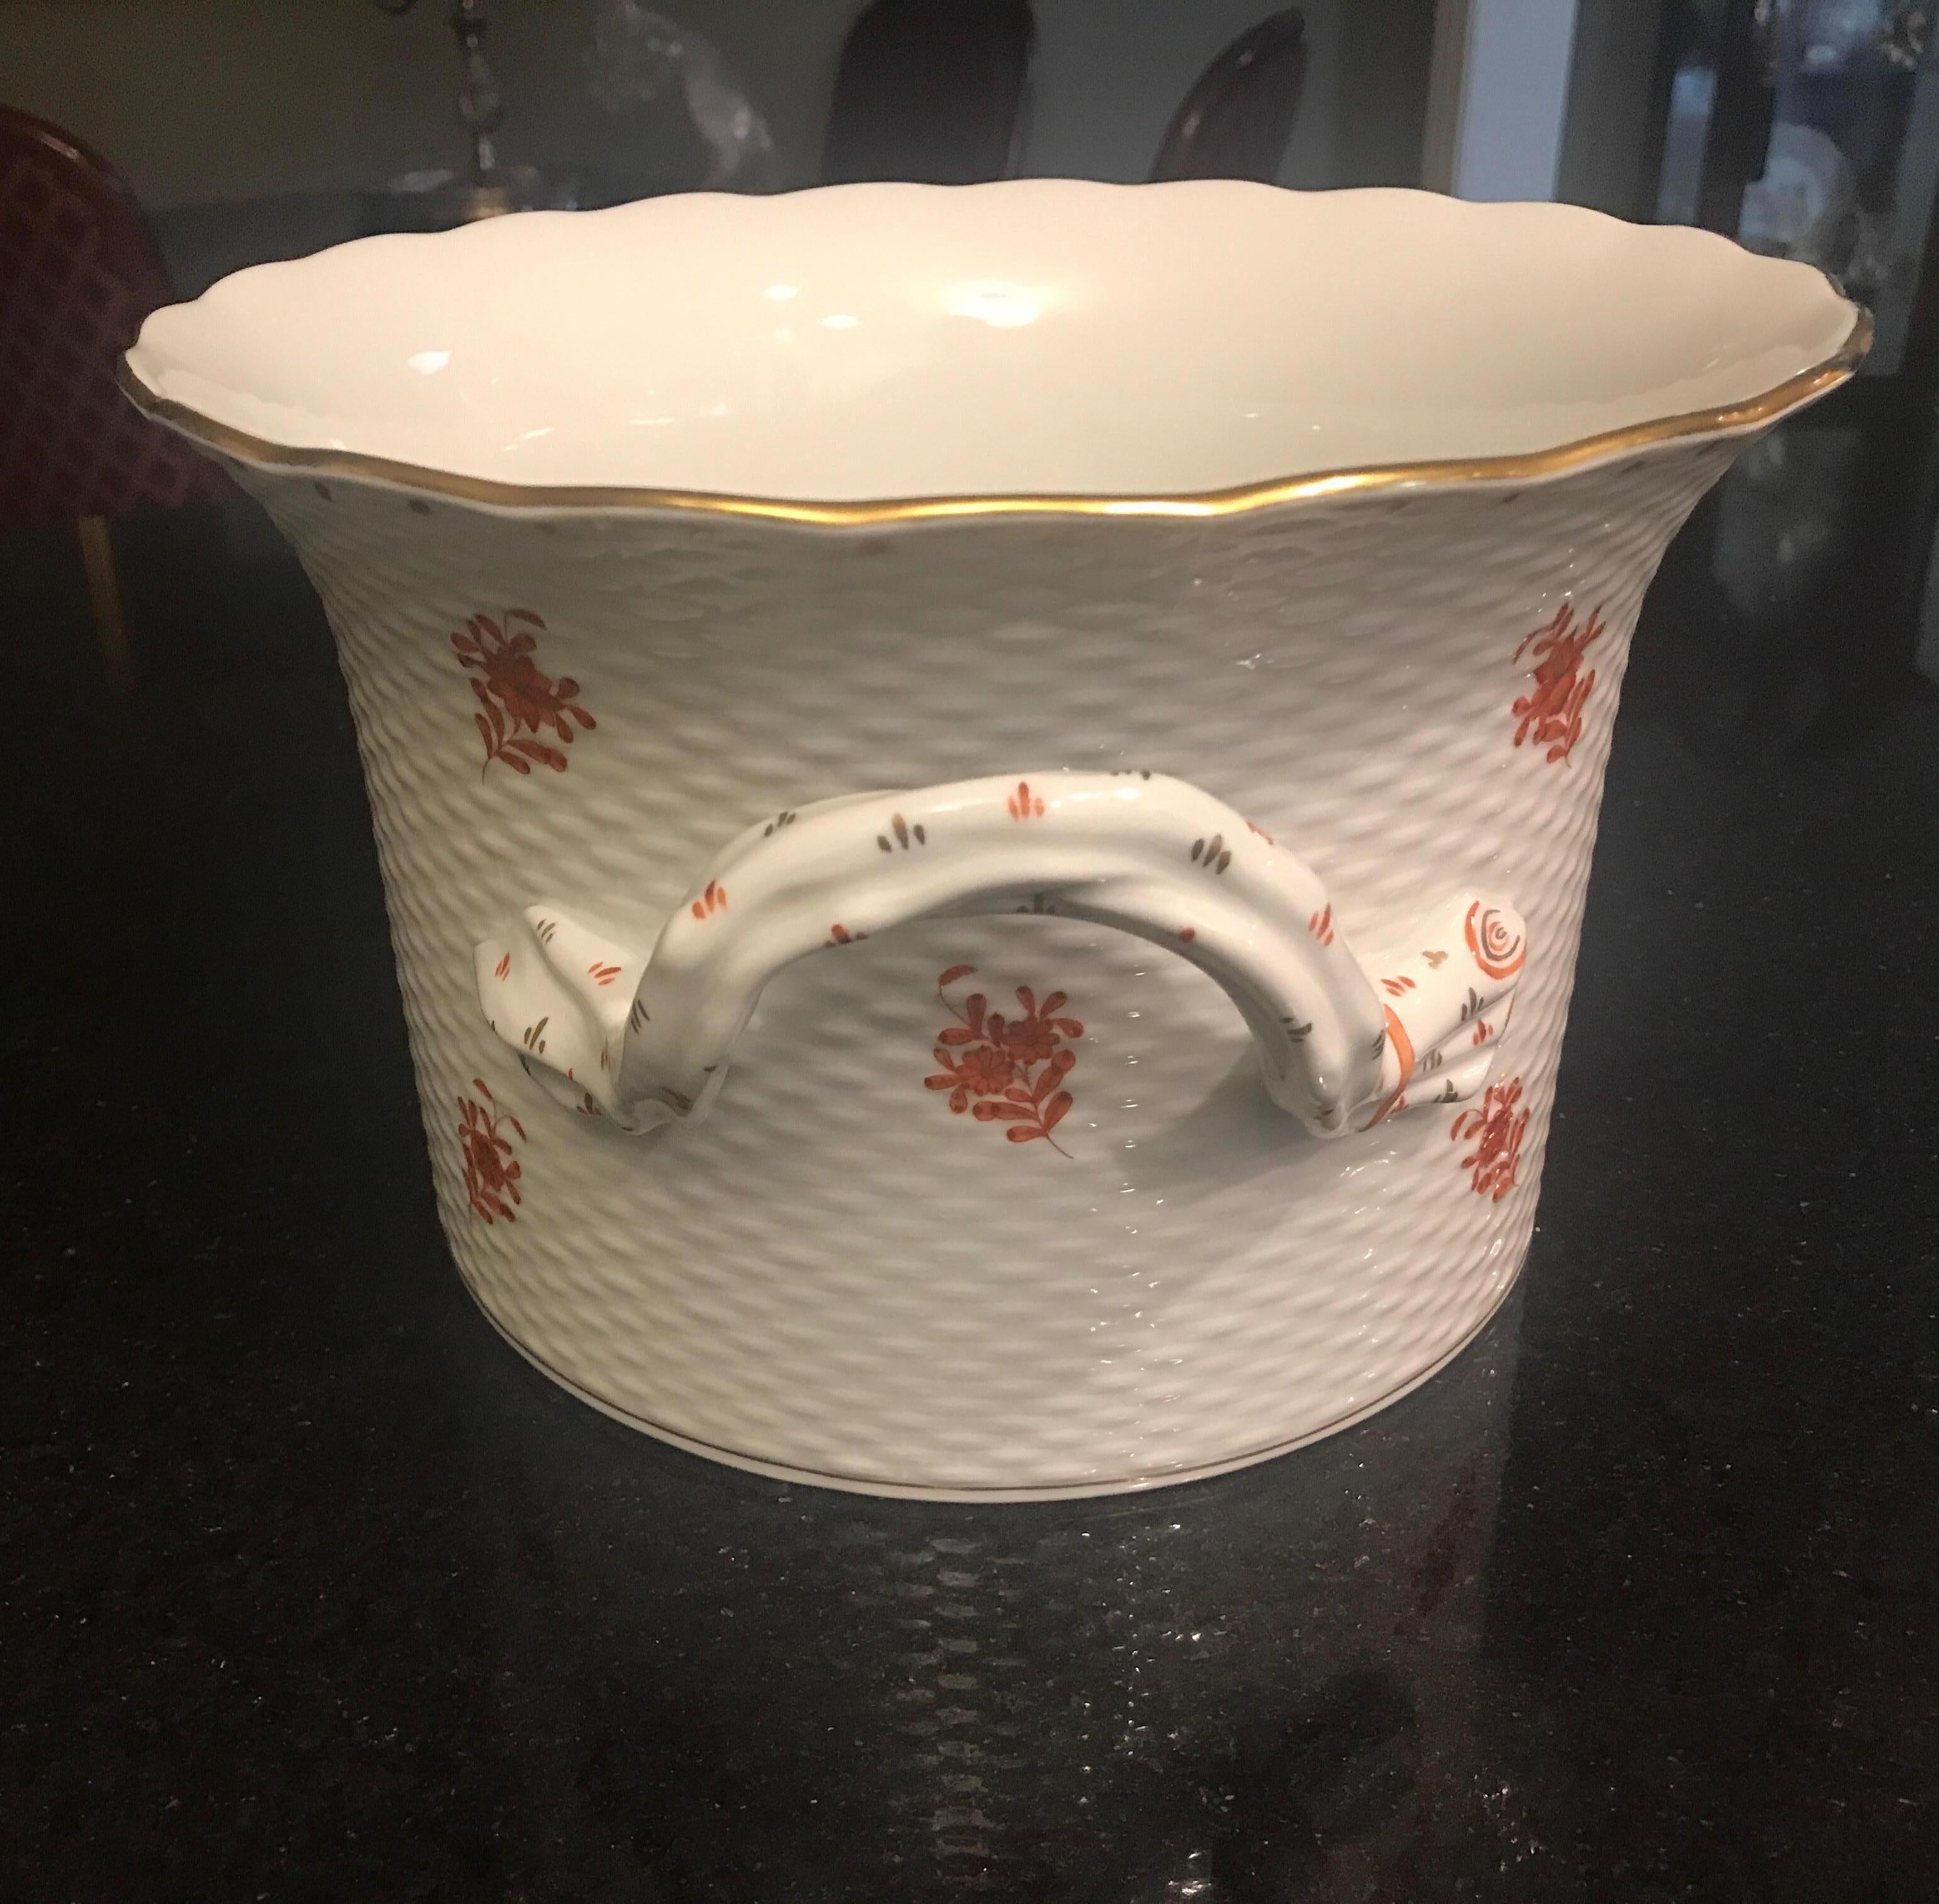 Exquisite porcelain cachepot hand painted by Herand. Originally created in 1930 for Count Albert Apponyi, the pattern features a center motif of a stylized peony surrounded by a garland of leaves with 24-karat gold rosettes. This was available in